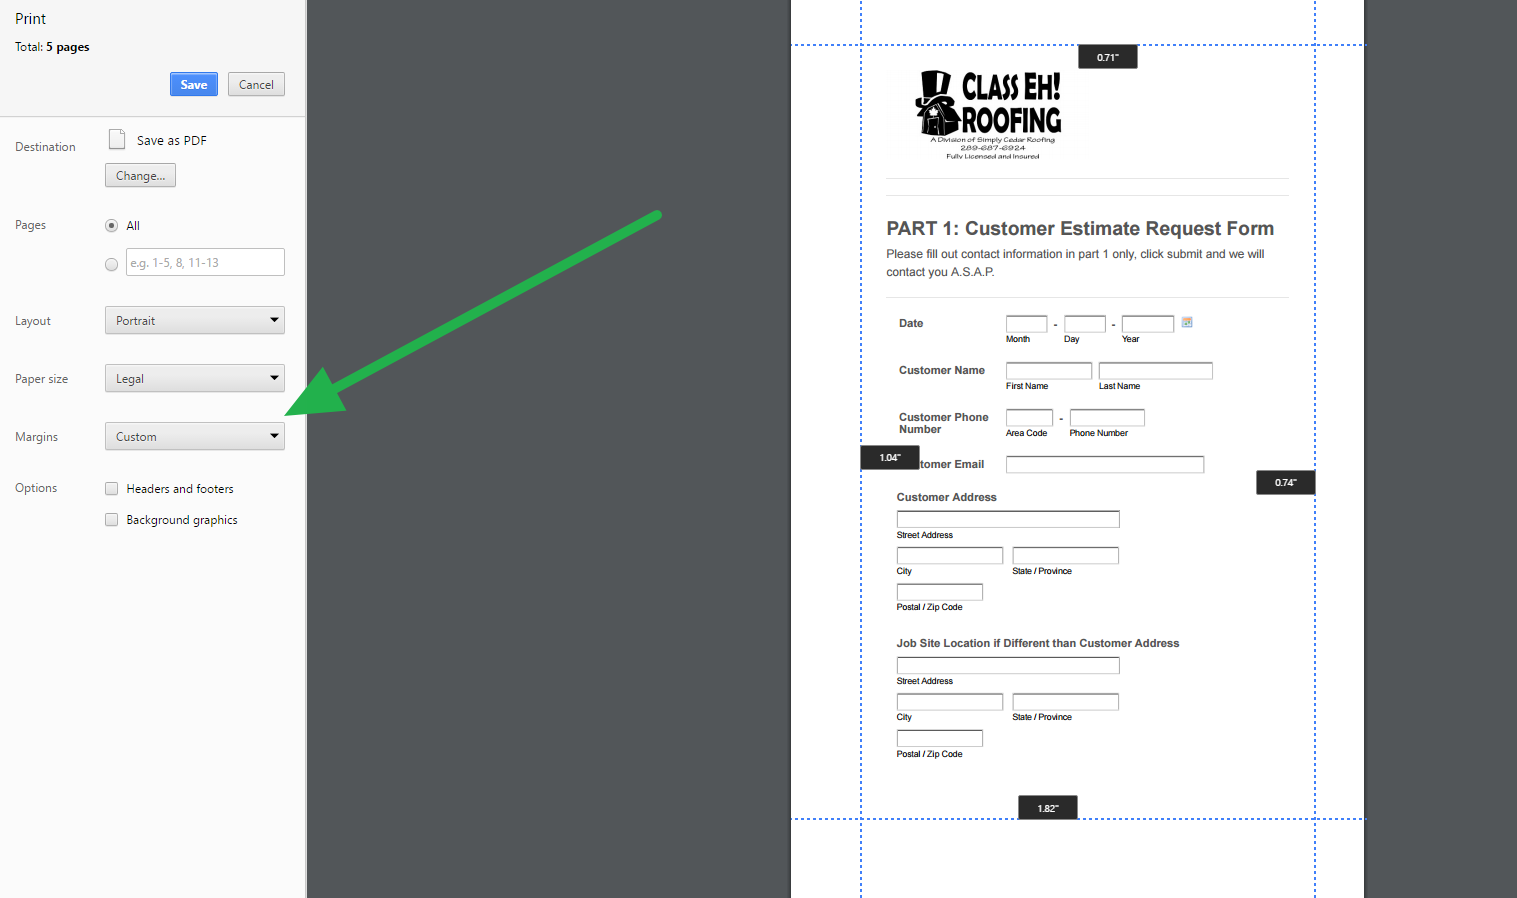 Adjusting the form width for viewing and printing Image 3 Screenshot 62